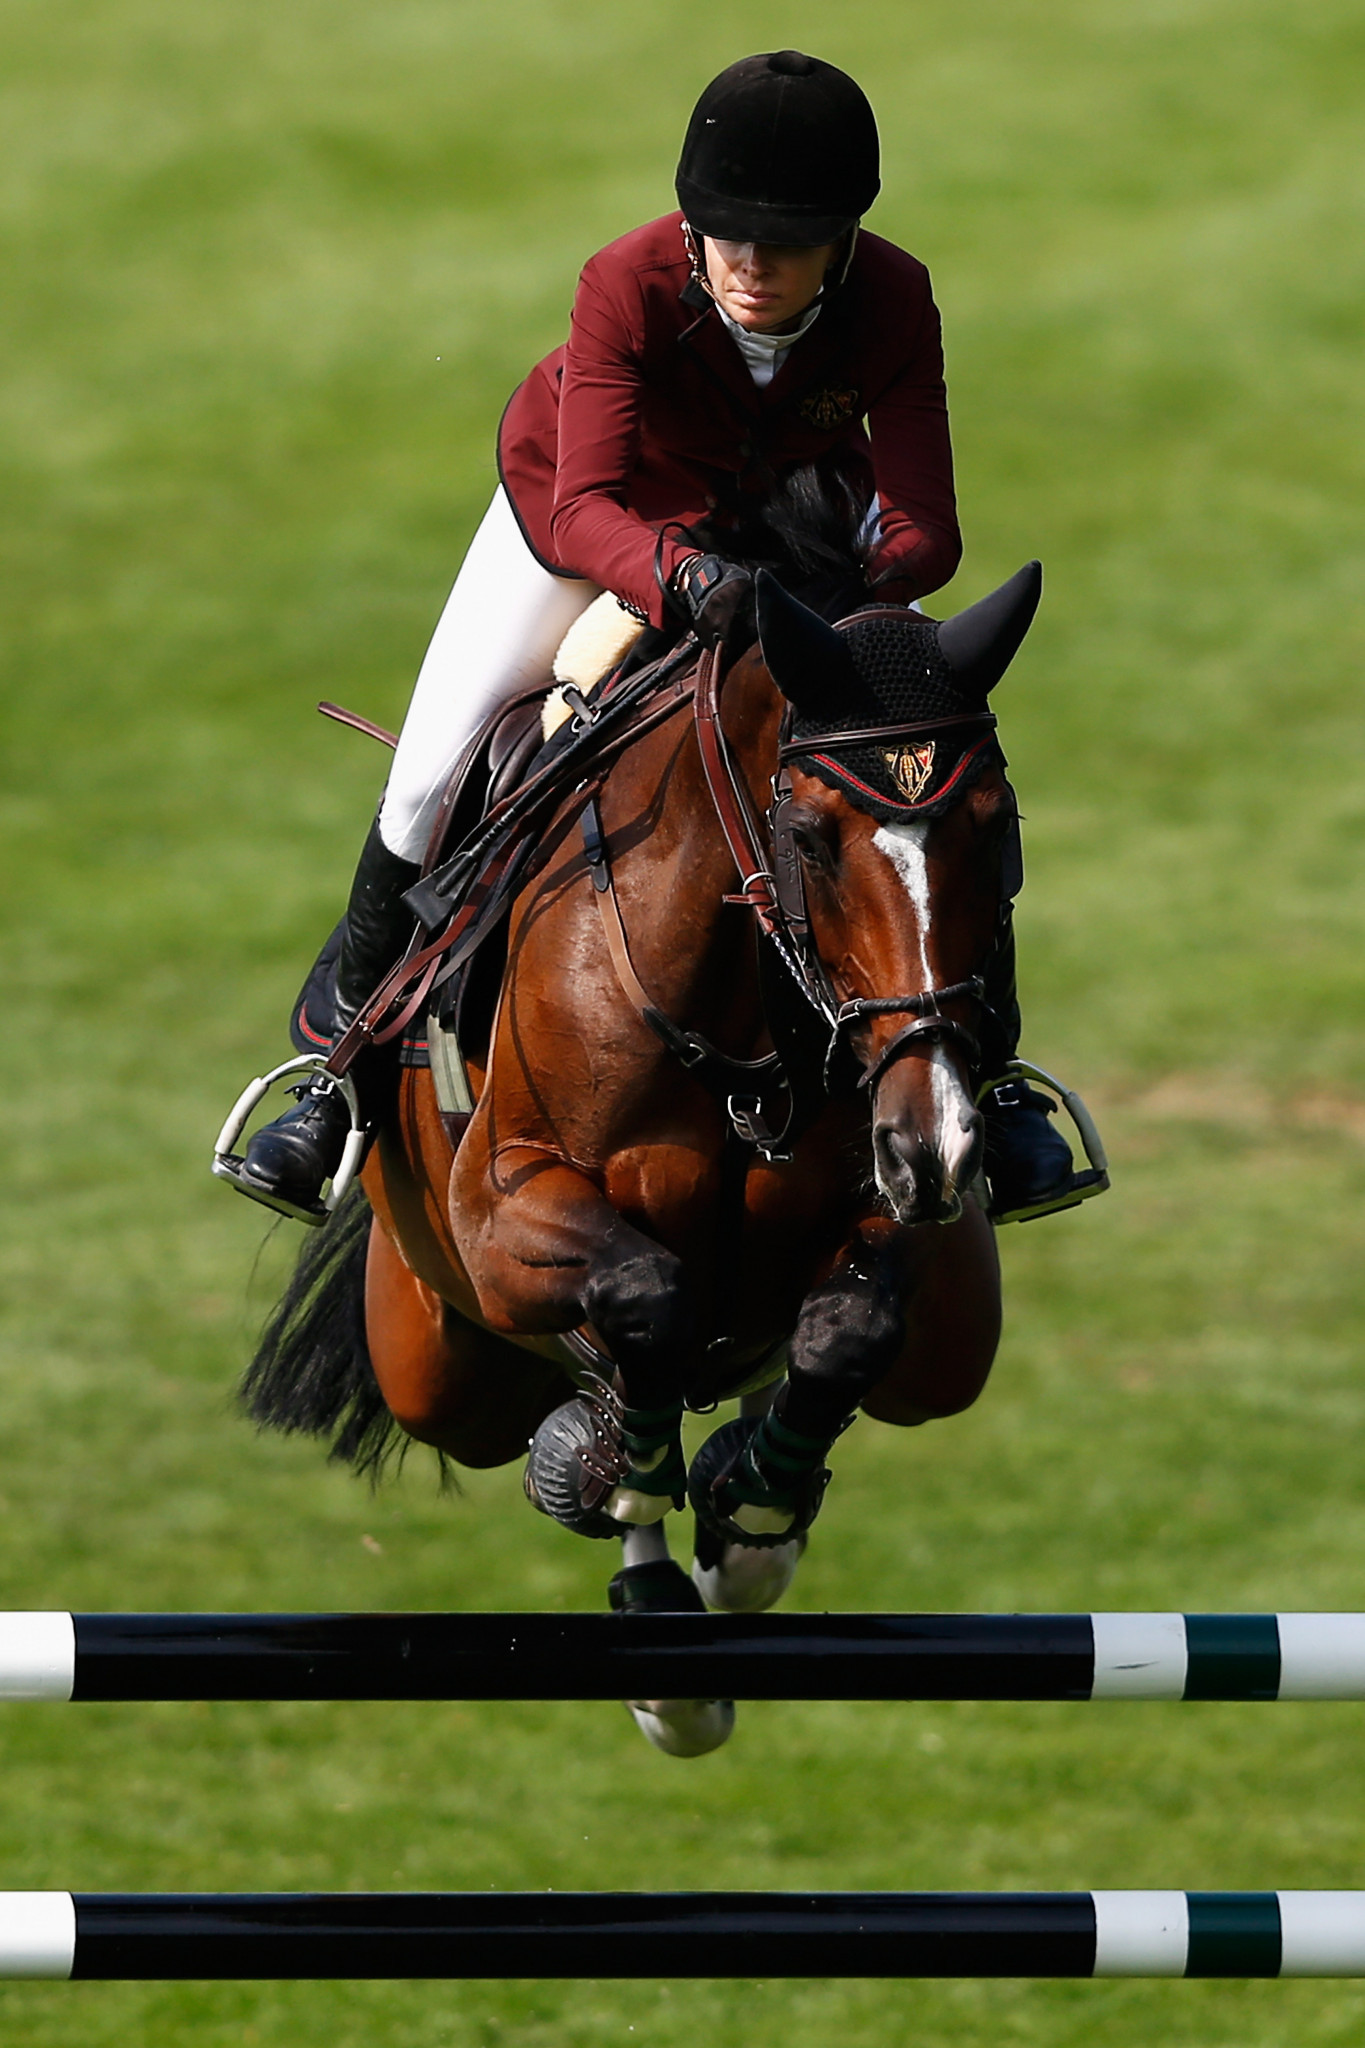 Edwina Tops-Alexander is a former two-time winner ©Getty Images